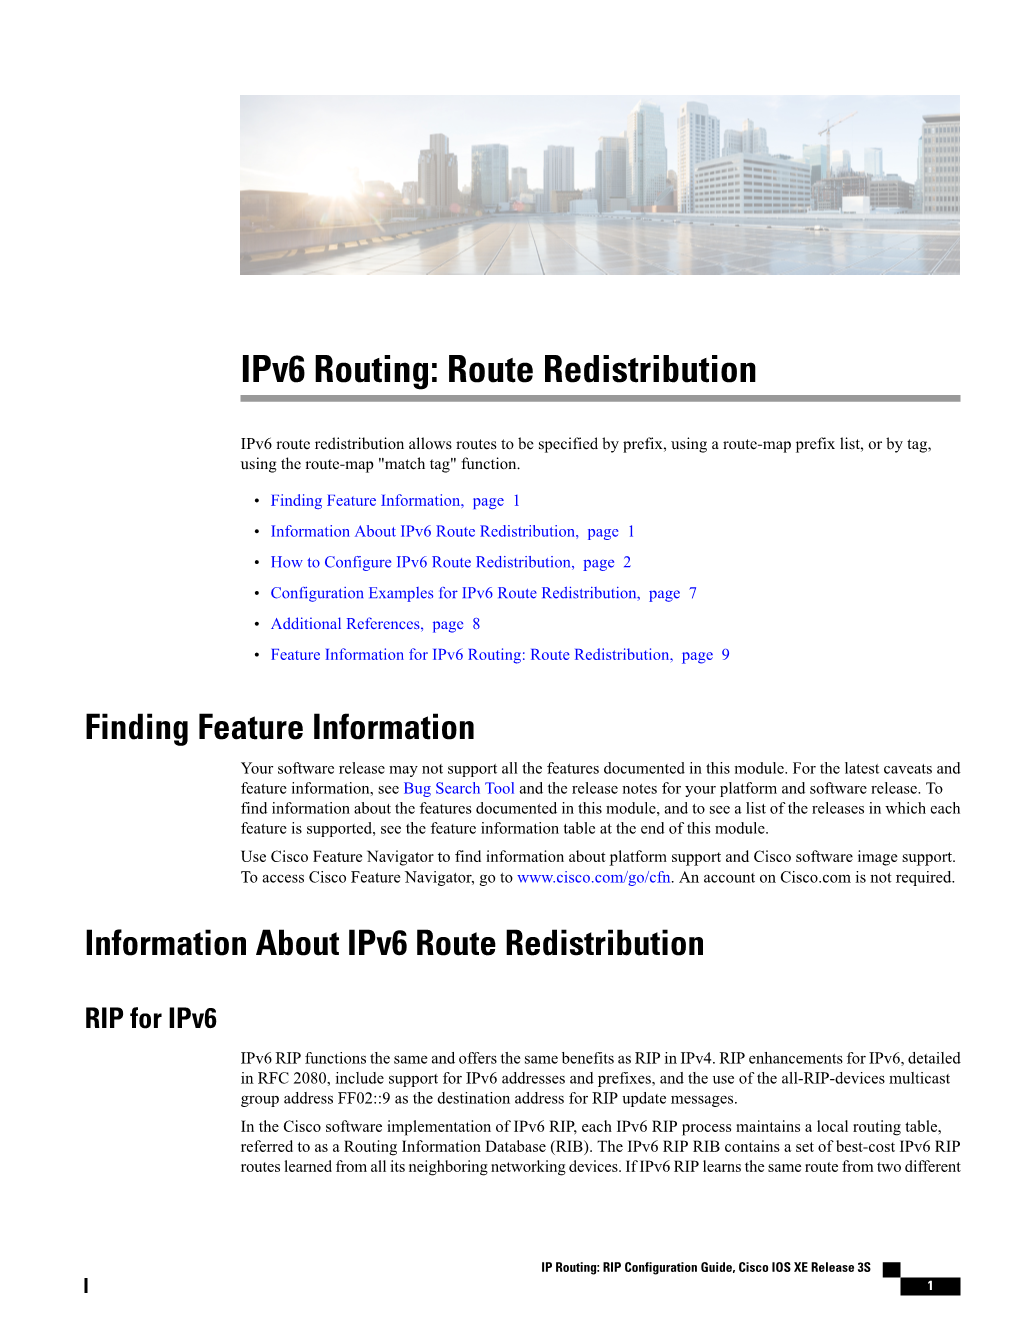 Ipv6 Routing: Route Redistribution